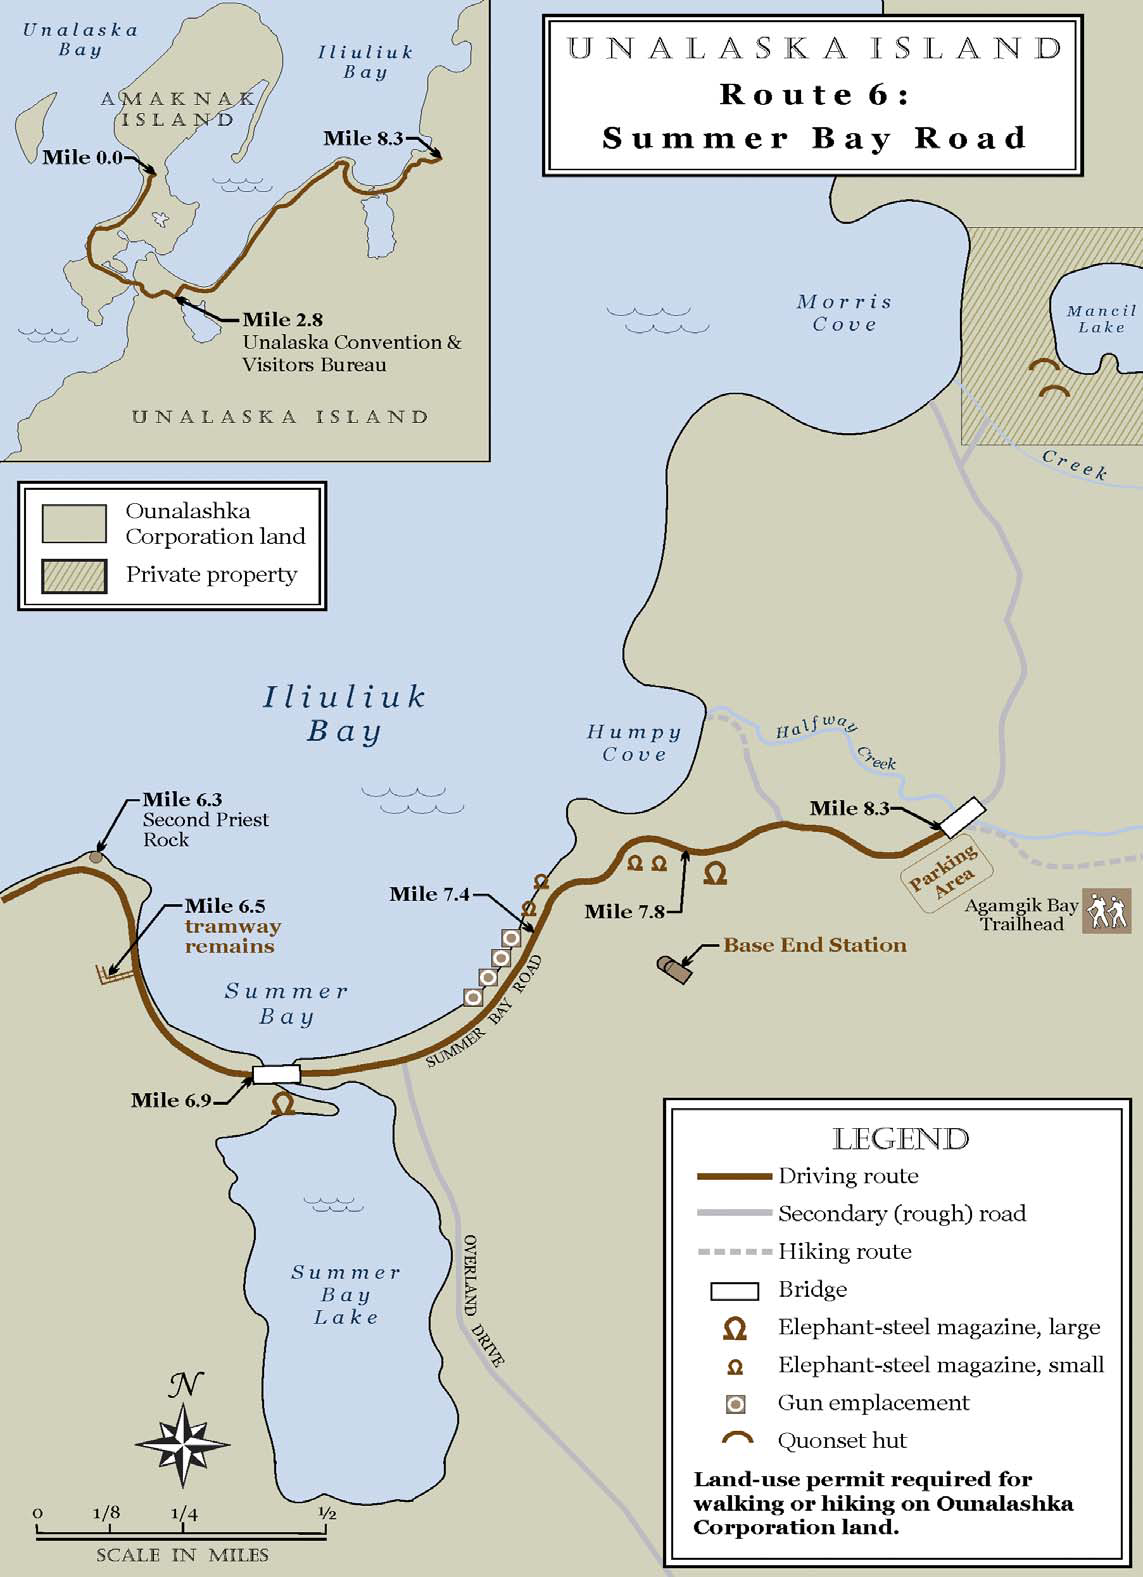 map showing route along Iliuliuk Bay with 5 sites along the way